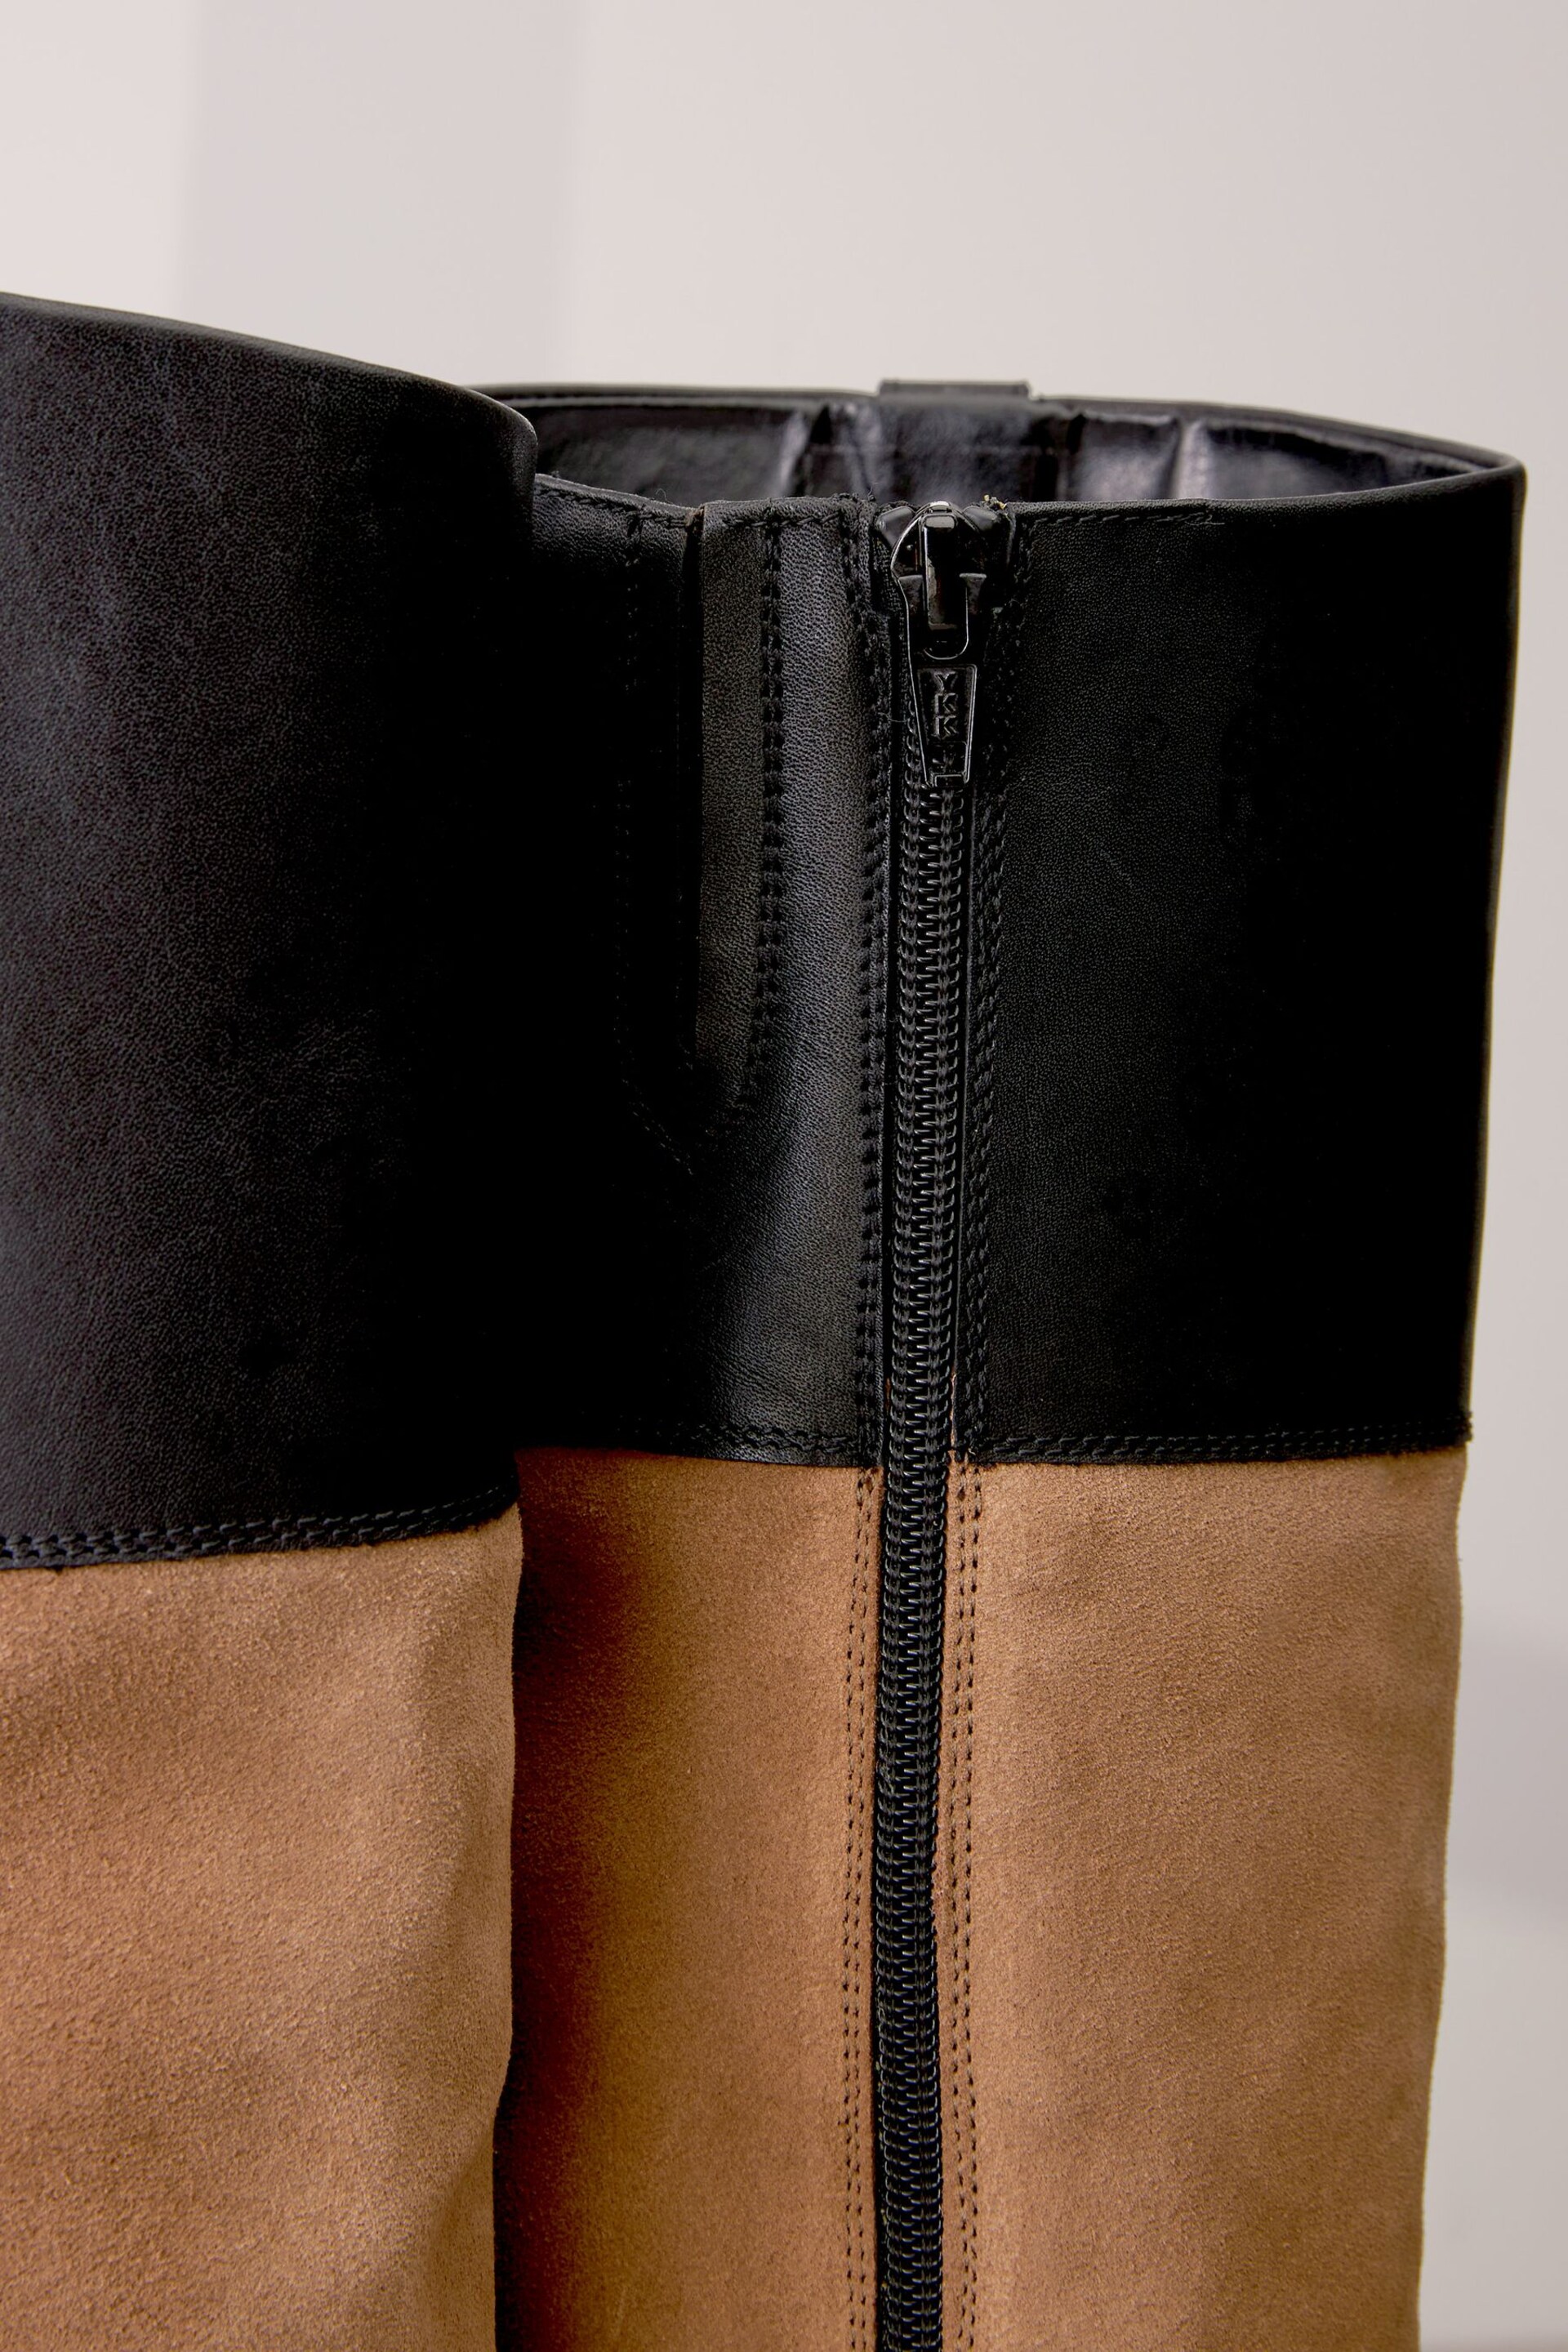 Tan & Black Signature Leather Panelled Rider Knee High Boots - Image 4 of 6